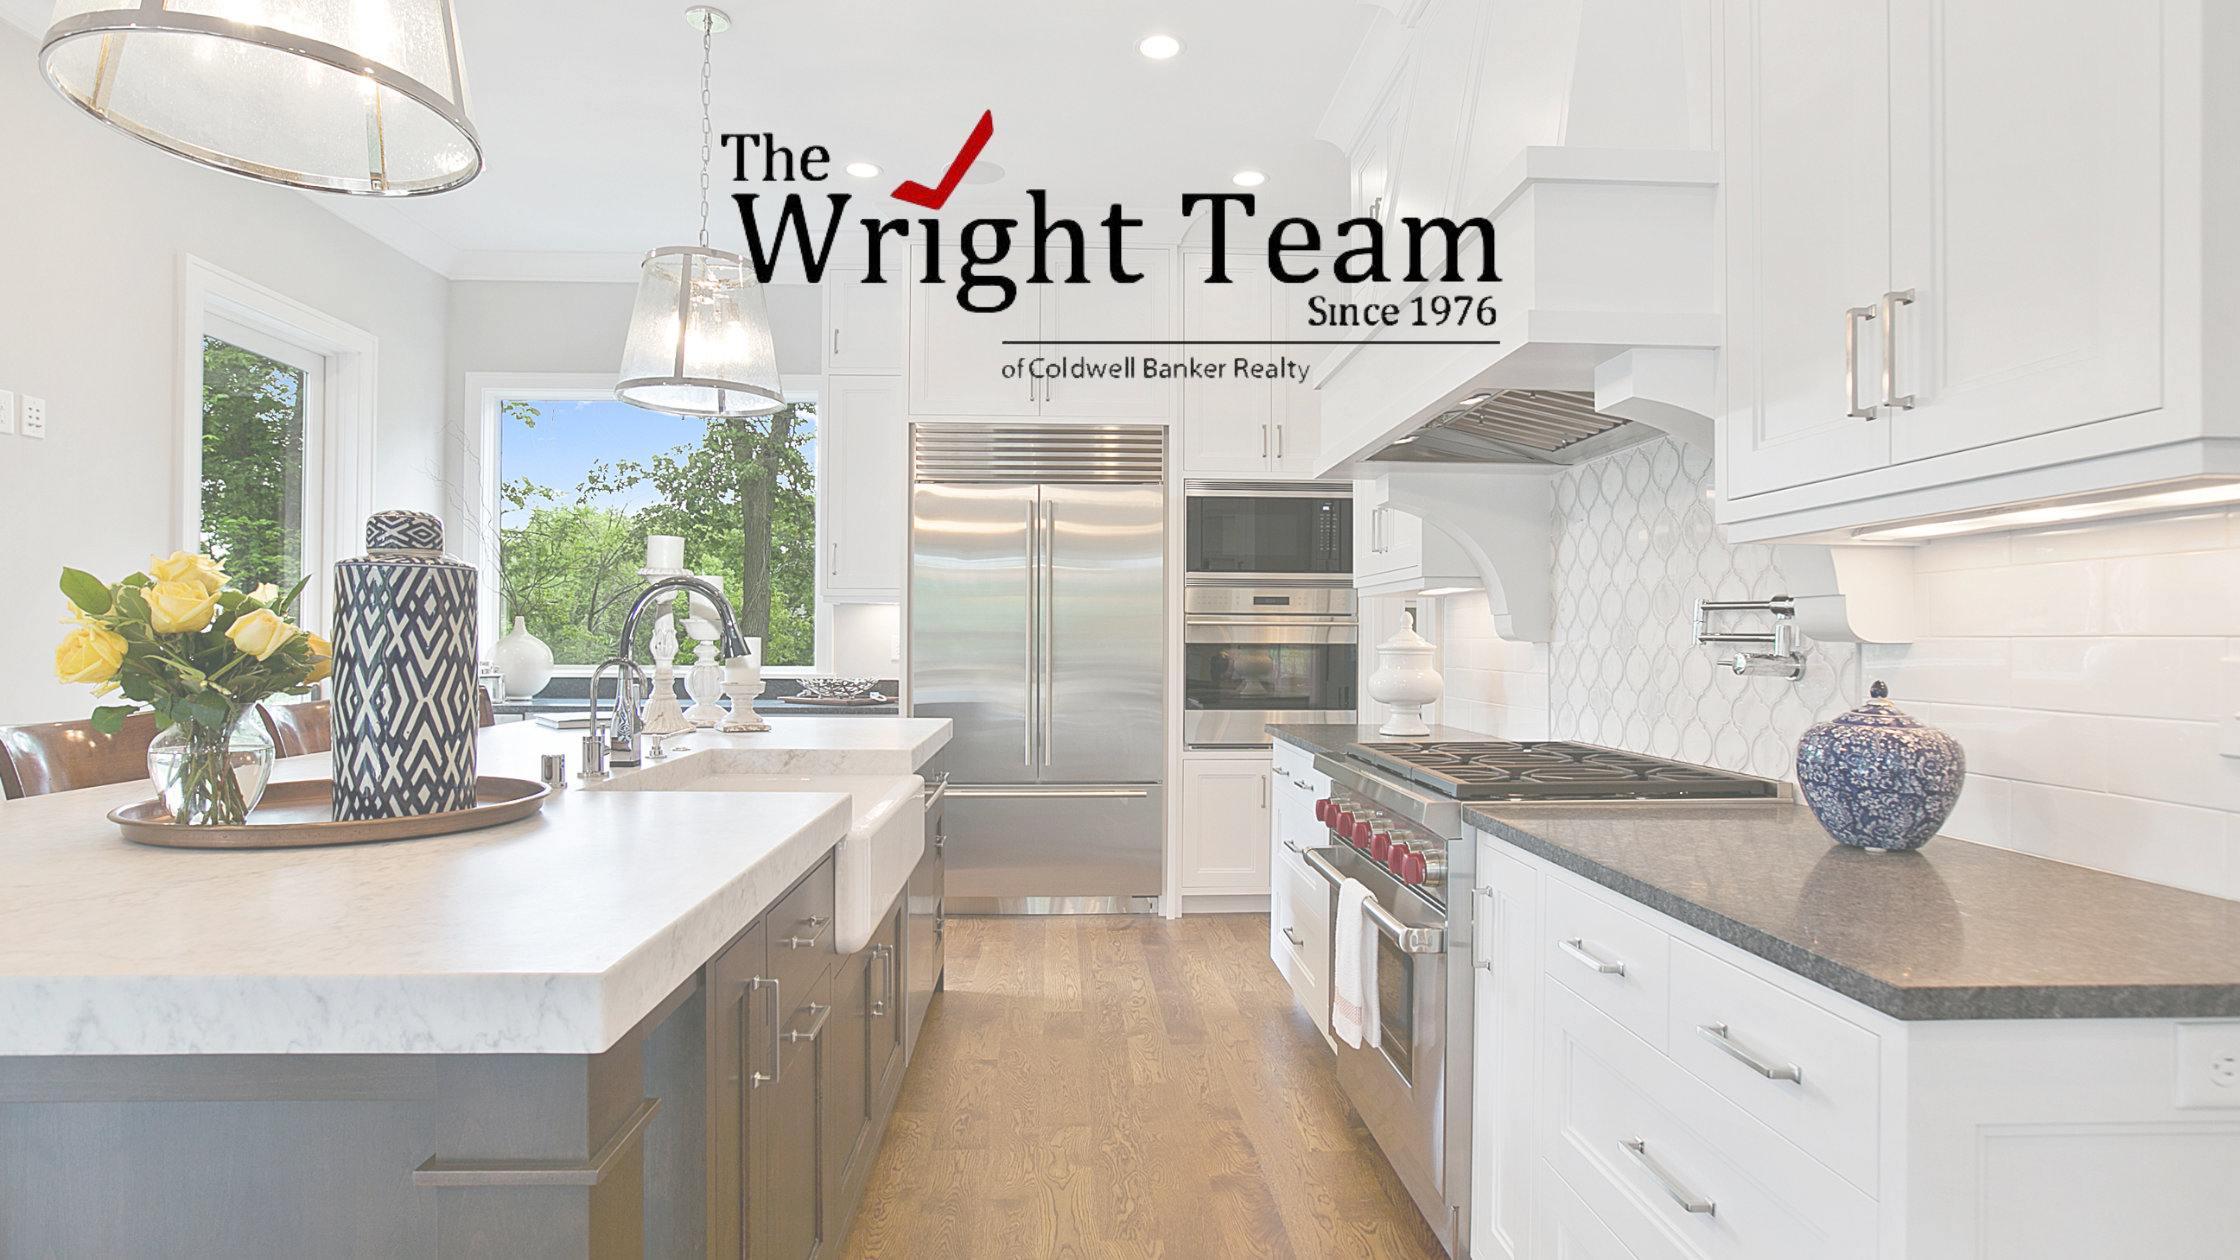 #1 Luxury Real Estate Brokerage in Annapolis. The Wright team